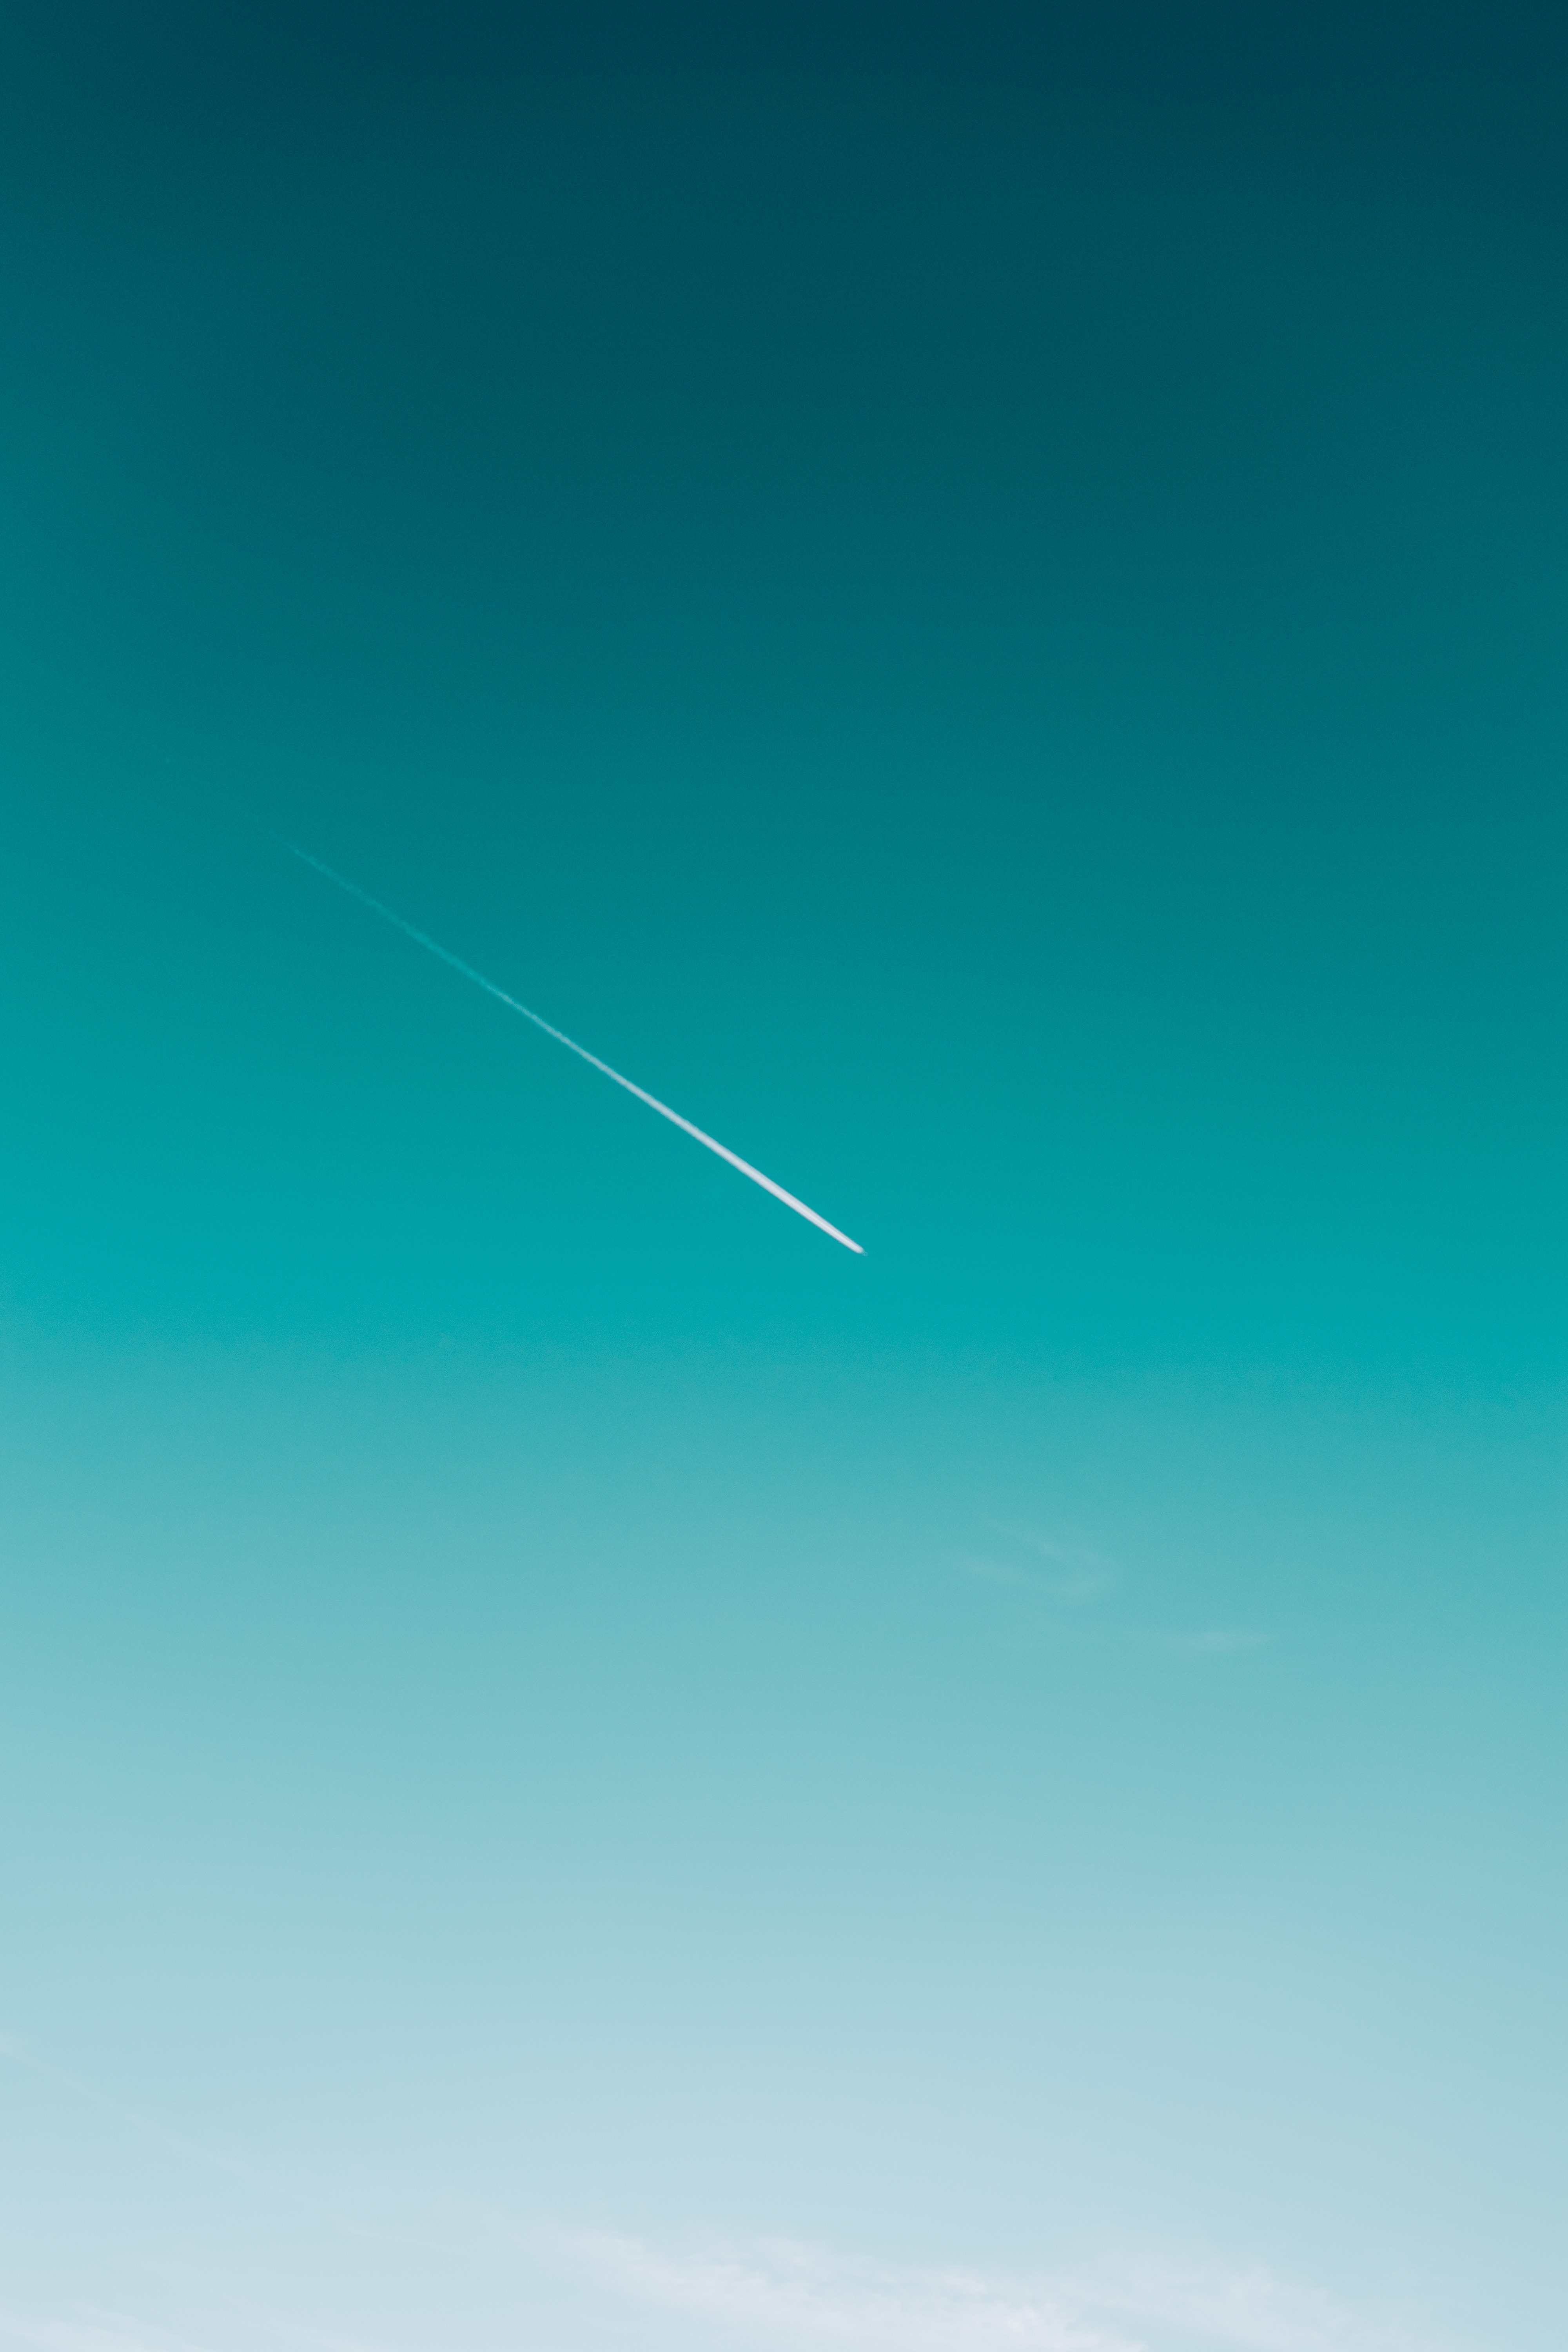 track, sky, plane, trace HD Wallpaper for Phone